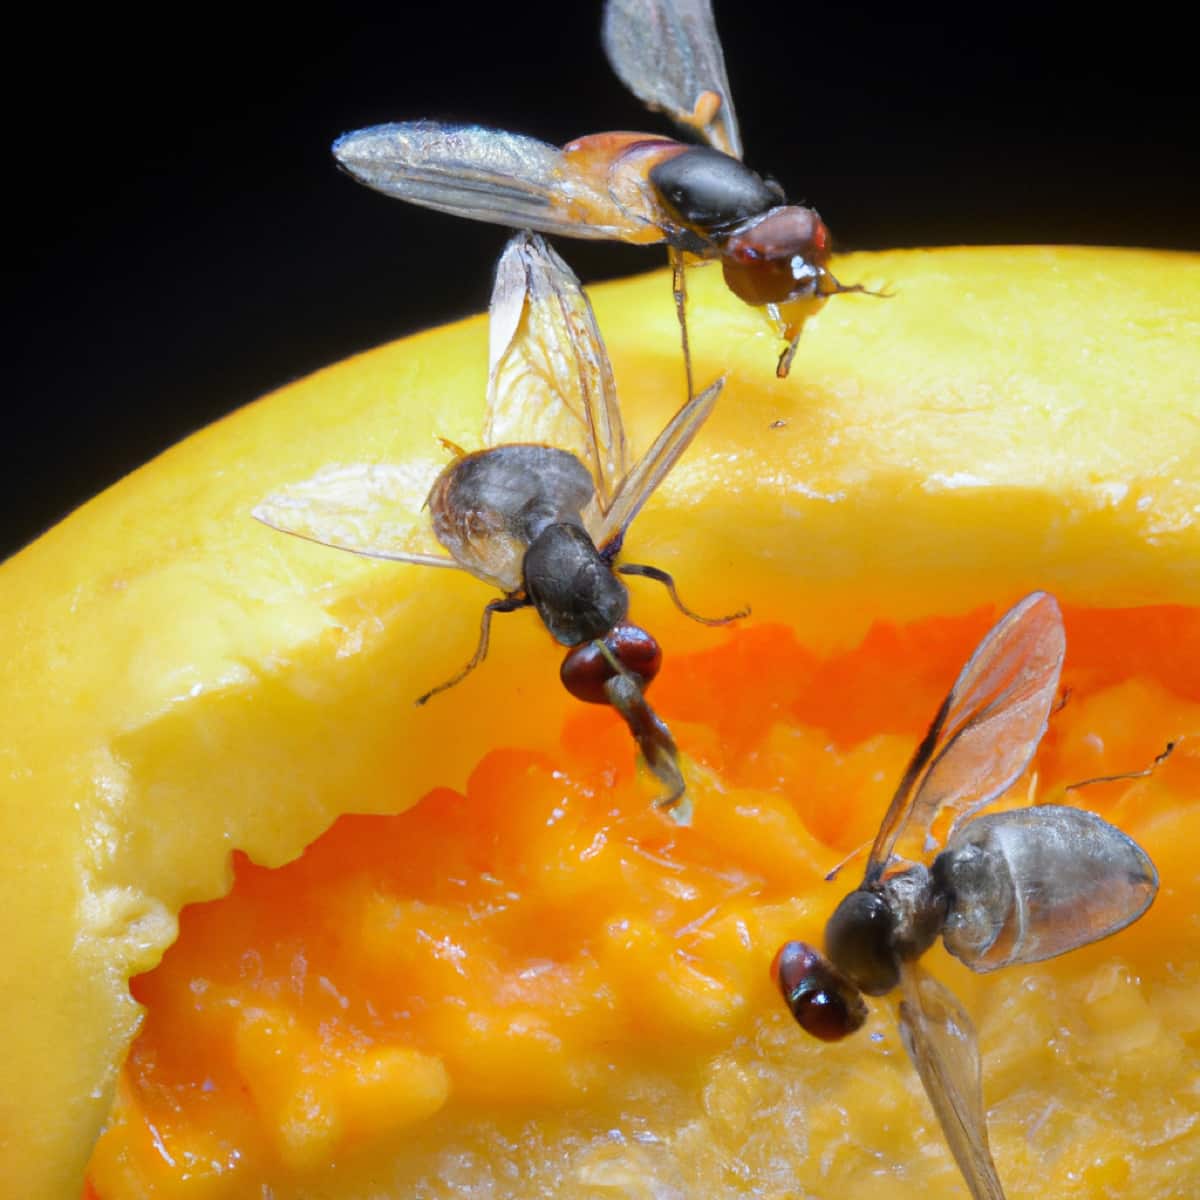 https://www.agrifarming.in/wp-content/uploads/Key-Rules-to-Get-Rid-of-Fruit-Fly-in-Mango5.jpg